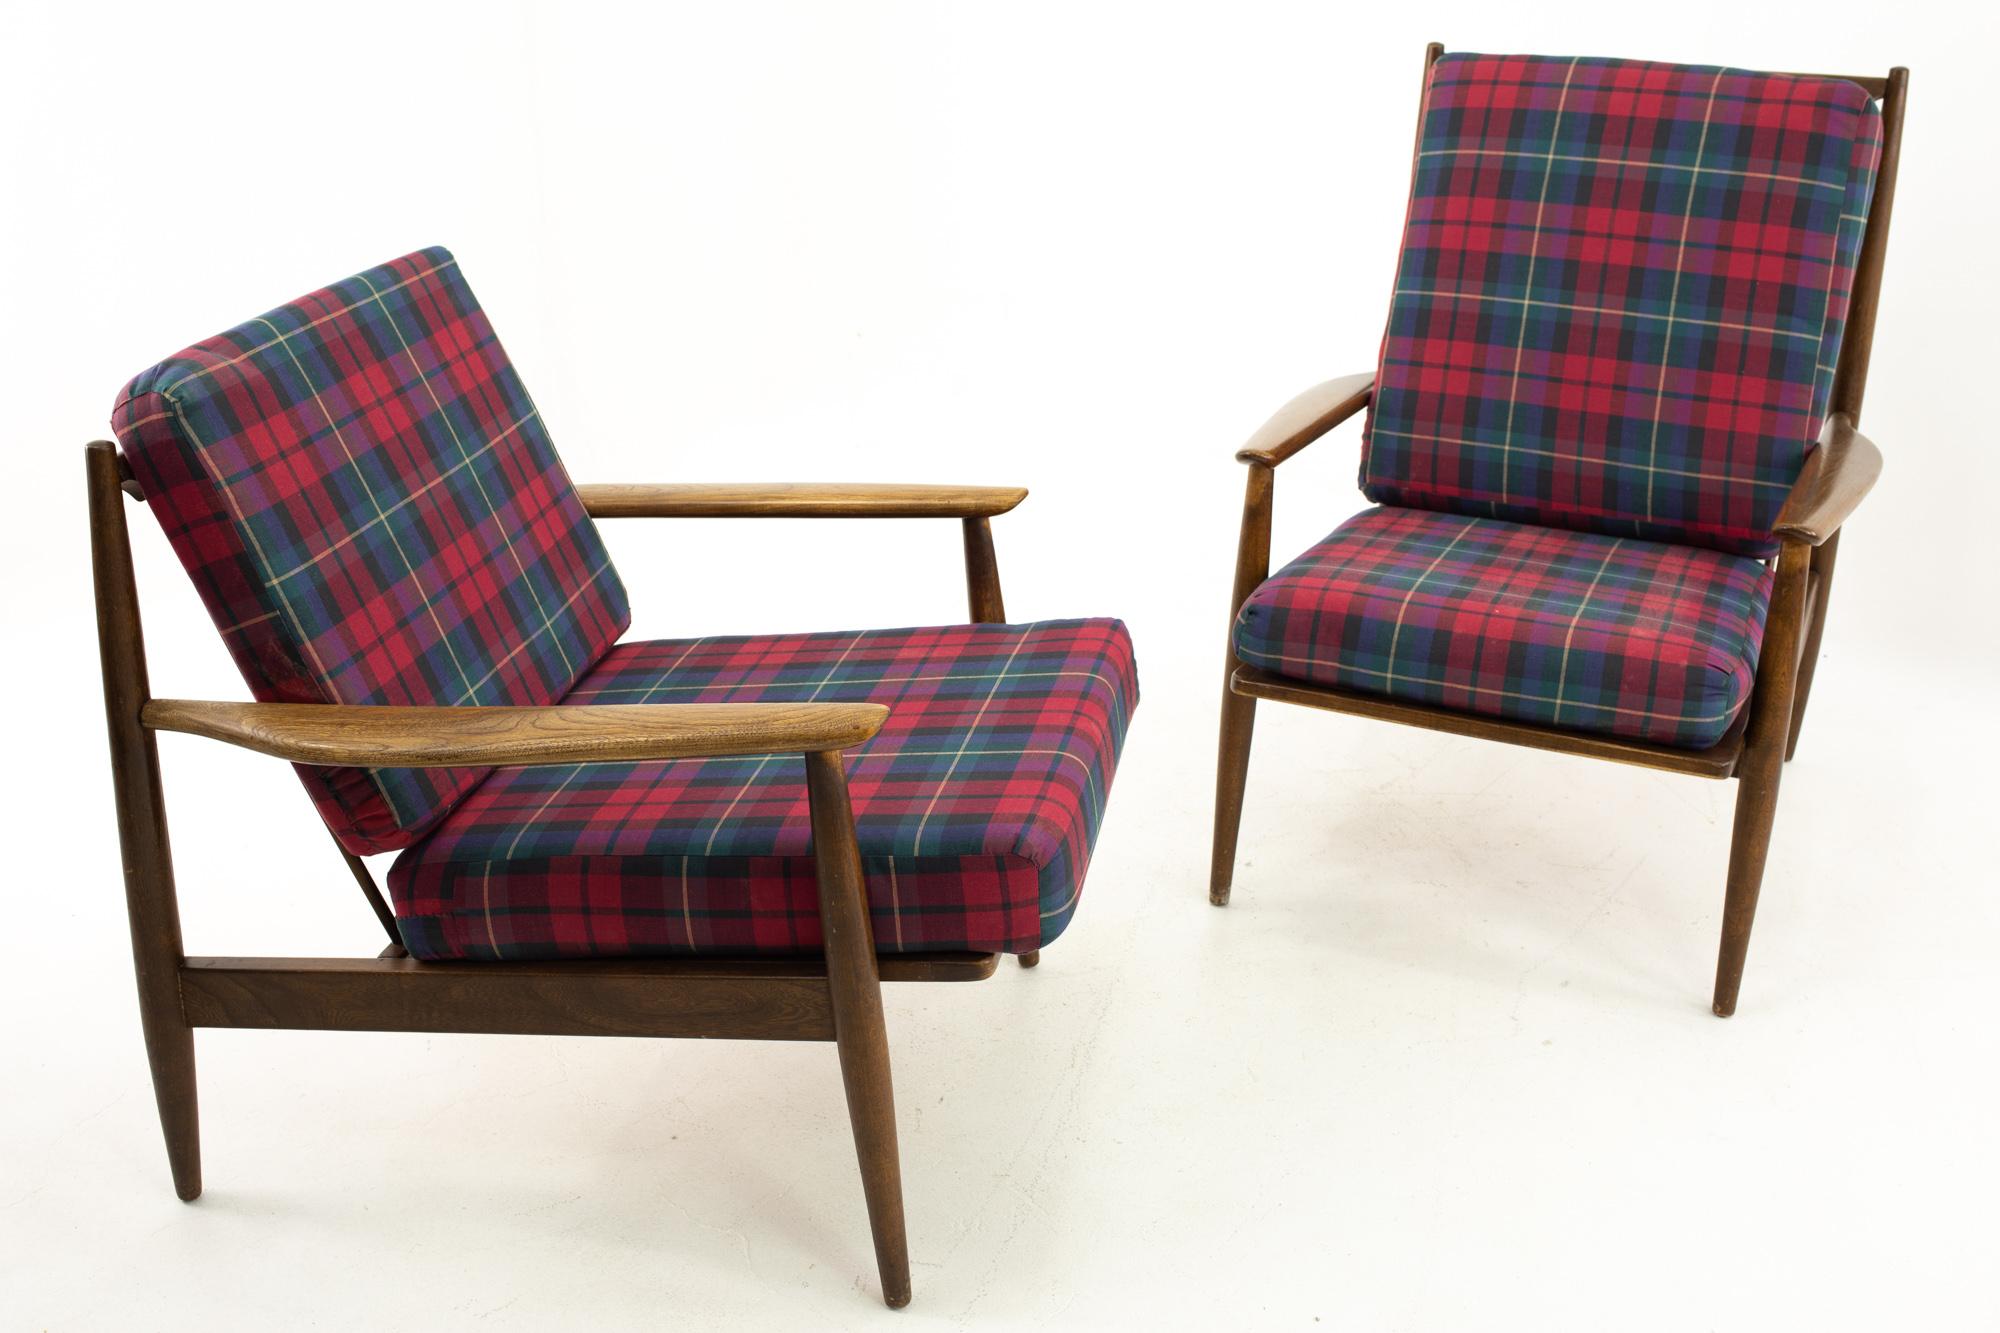 Danish style midcentury walnut lounge chairs - pair 
28 wide x 33 deep x 37 high with a seat height of 18 inches 
28 wide x 33 deep x 32 high with a seat height of 18 inches

This price includes getting this set in what we call restored vintage